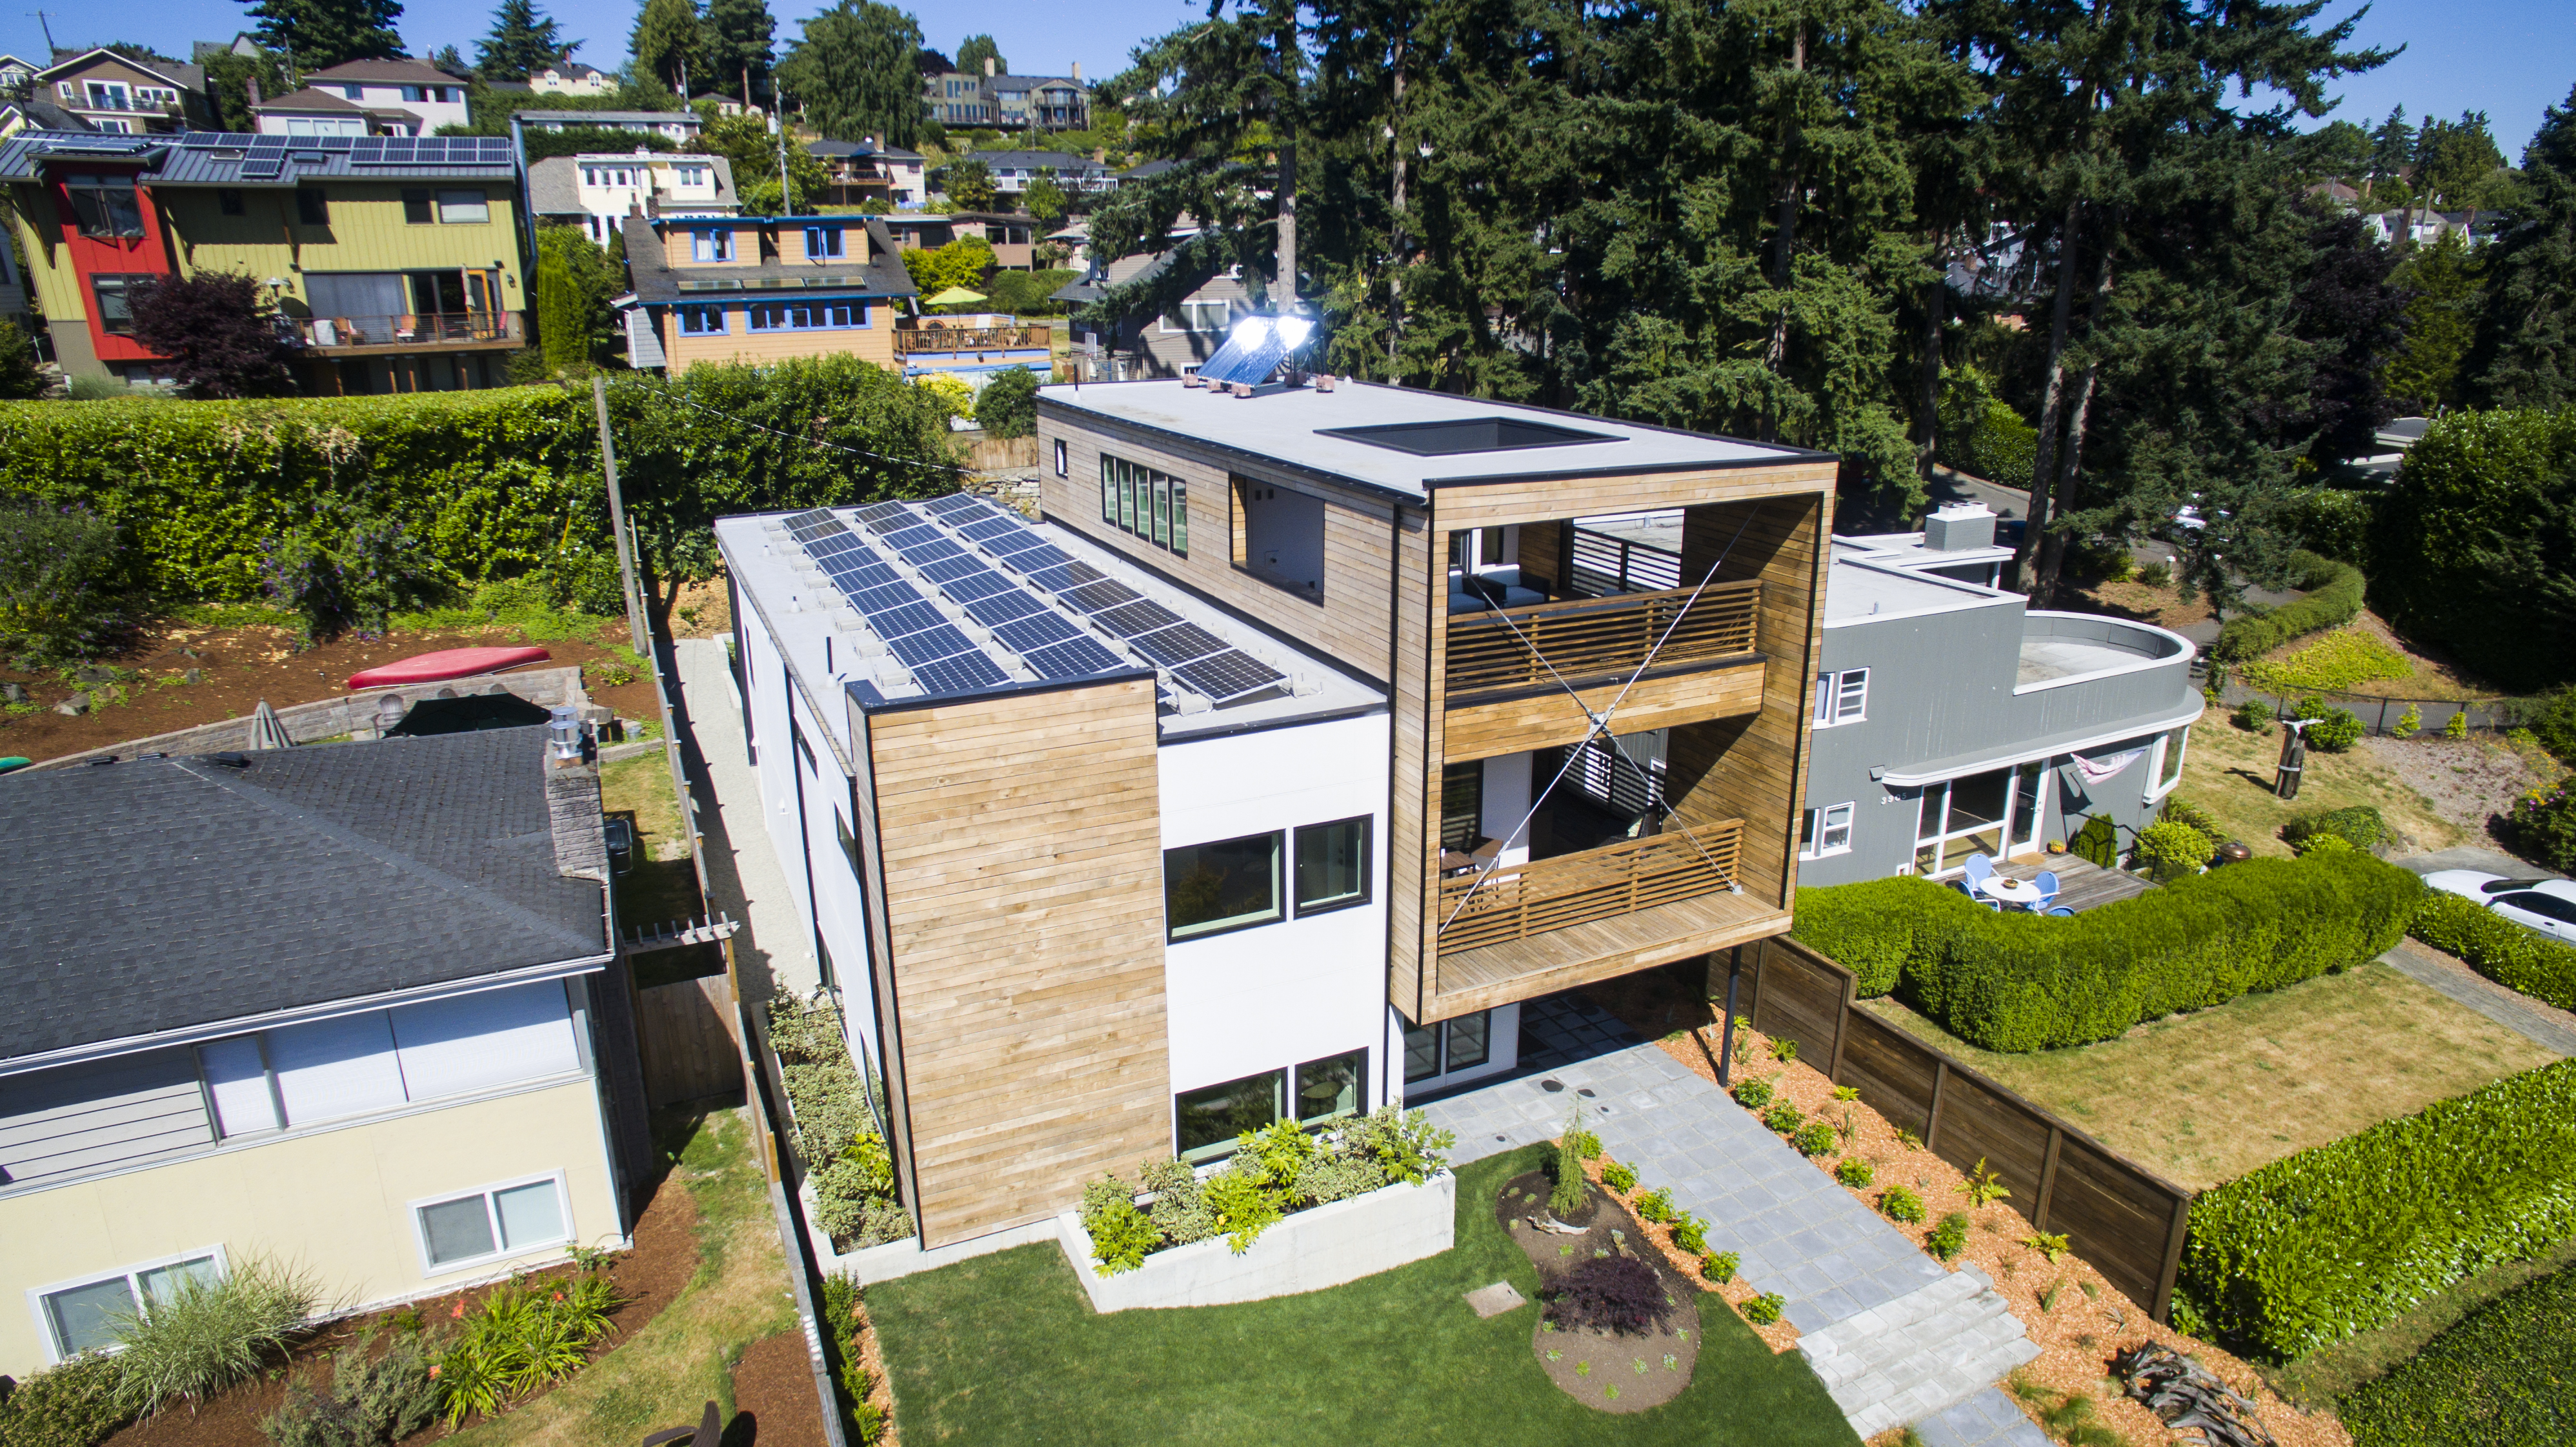 Dwell Development in Seattle won the top Housing Innovation Award in the Spec home category for a 3-story, 3700 square foot net zero energy home on Lake Washington. The company builds one-of-a-kind net-zero homes designed and detailed to compete with code-built homes.